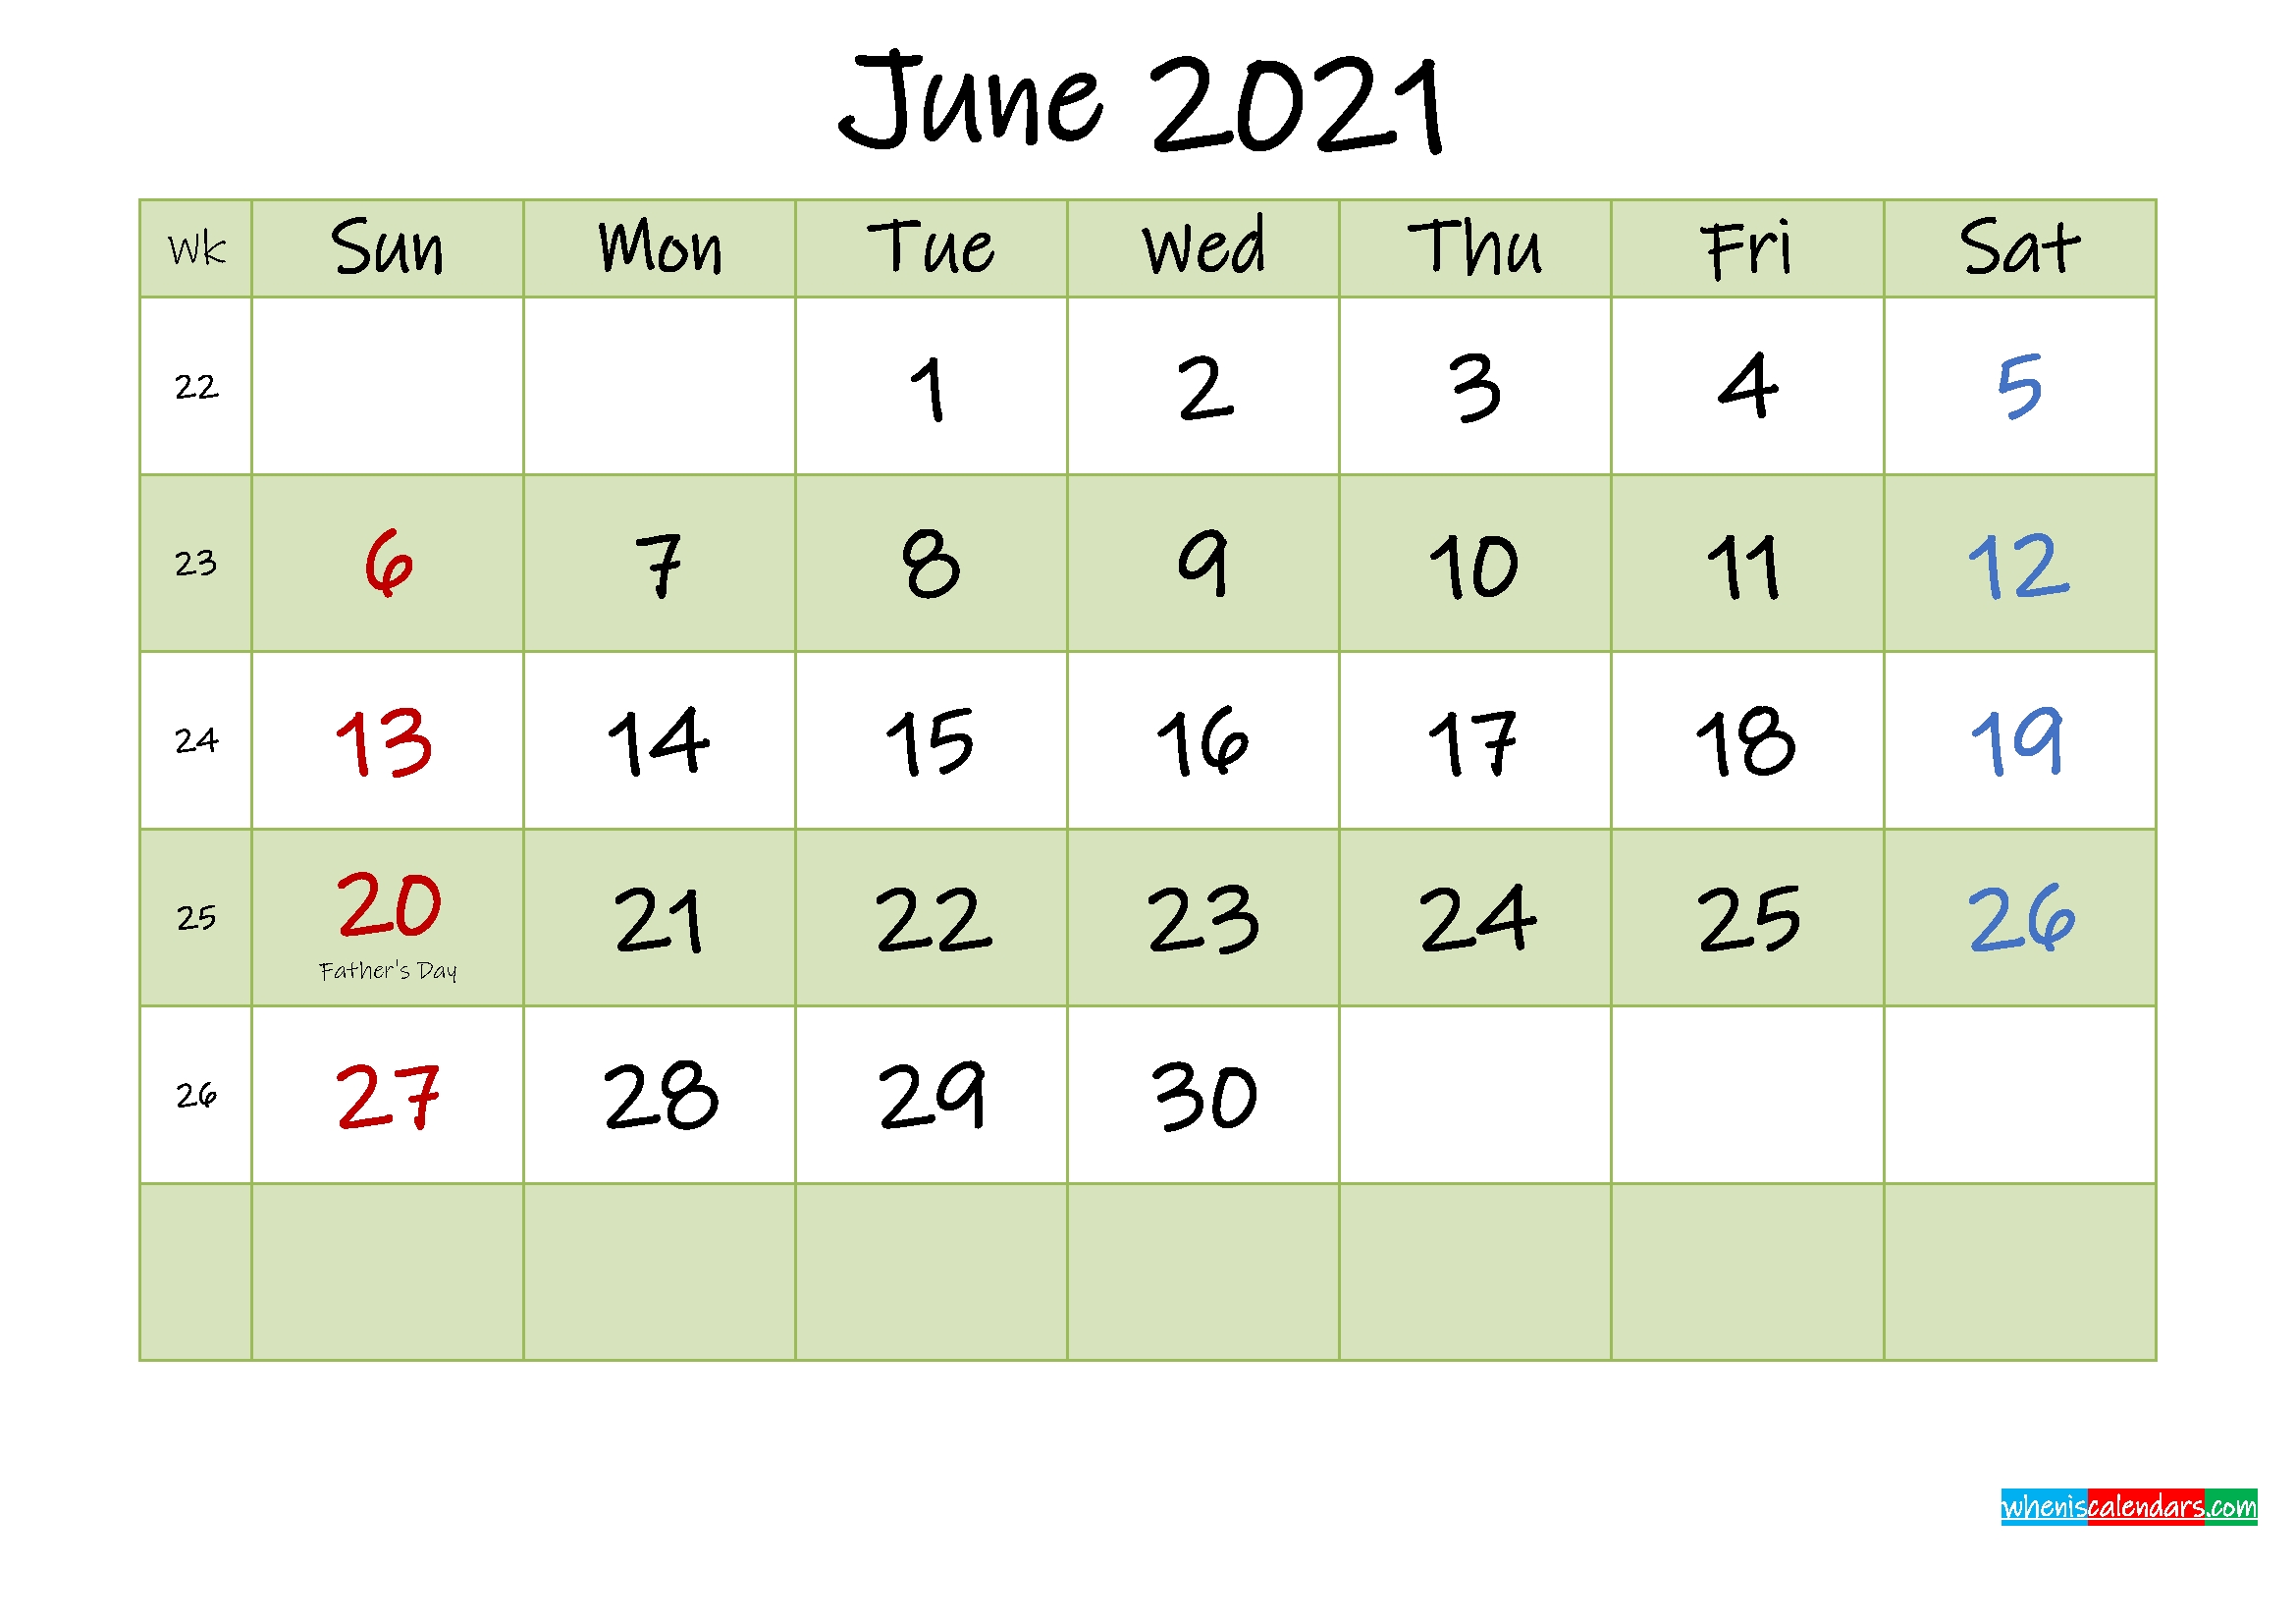 June 2021 Calendar With Holidays Printable - Template No.ink21M450 - Free Printable 2021 Monthly June-August 2021 Calendar